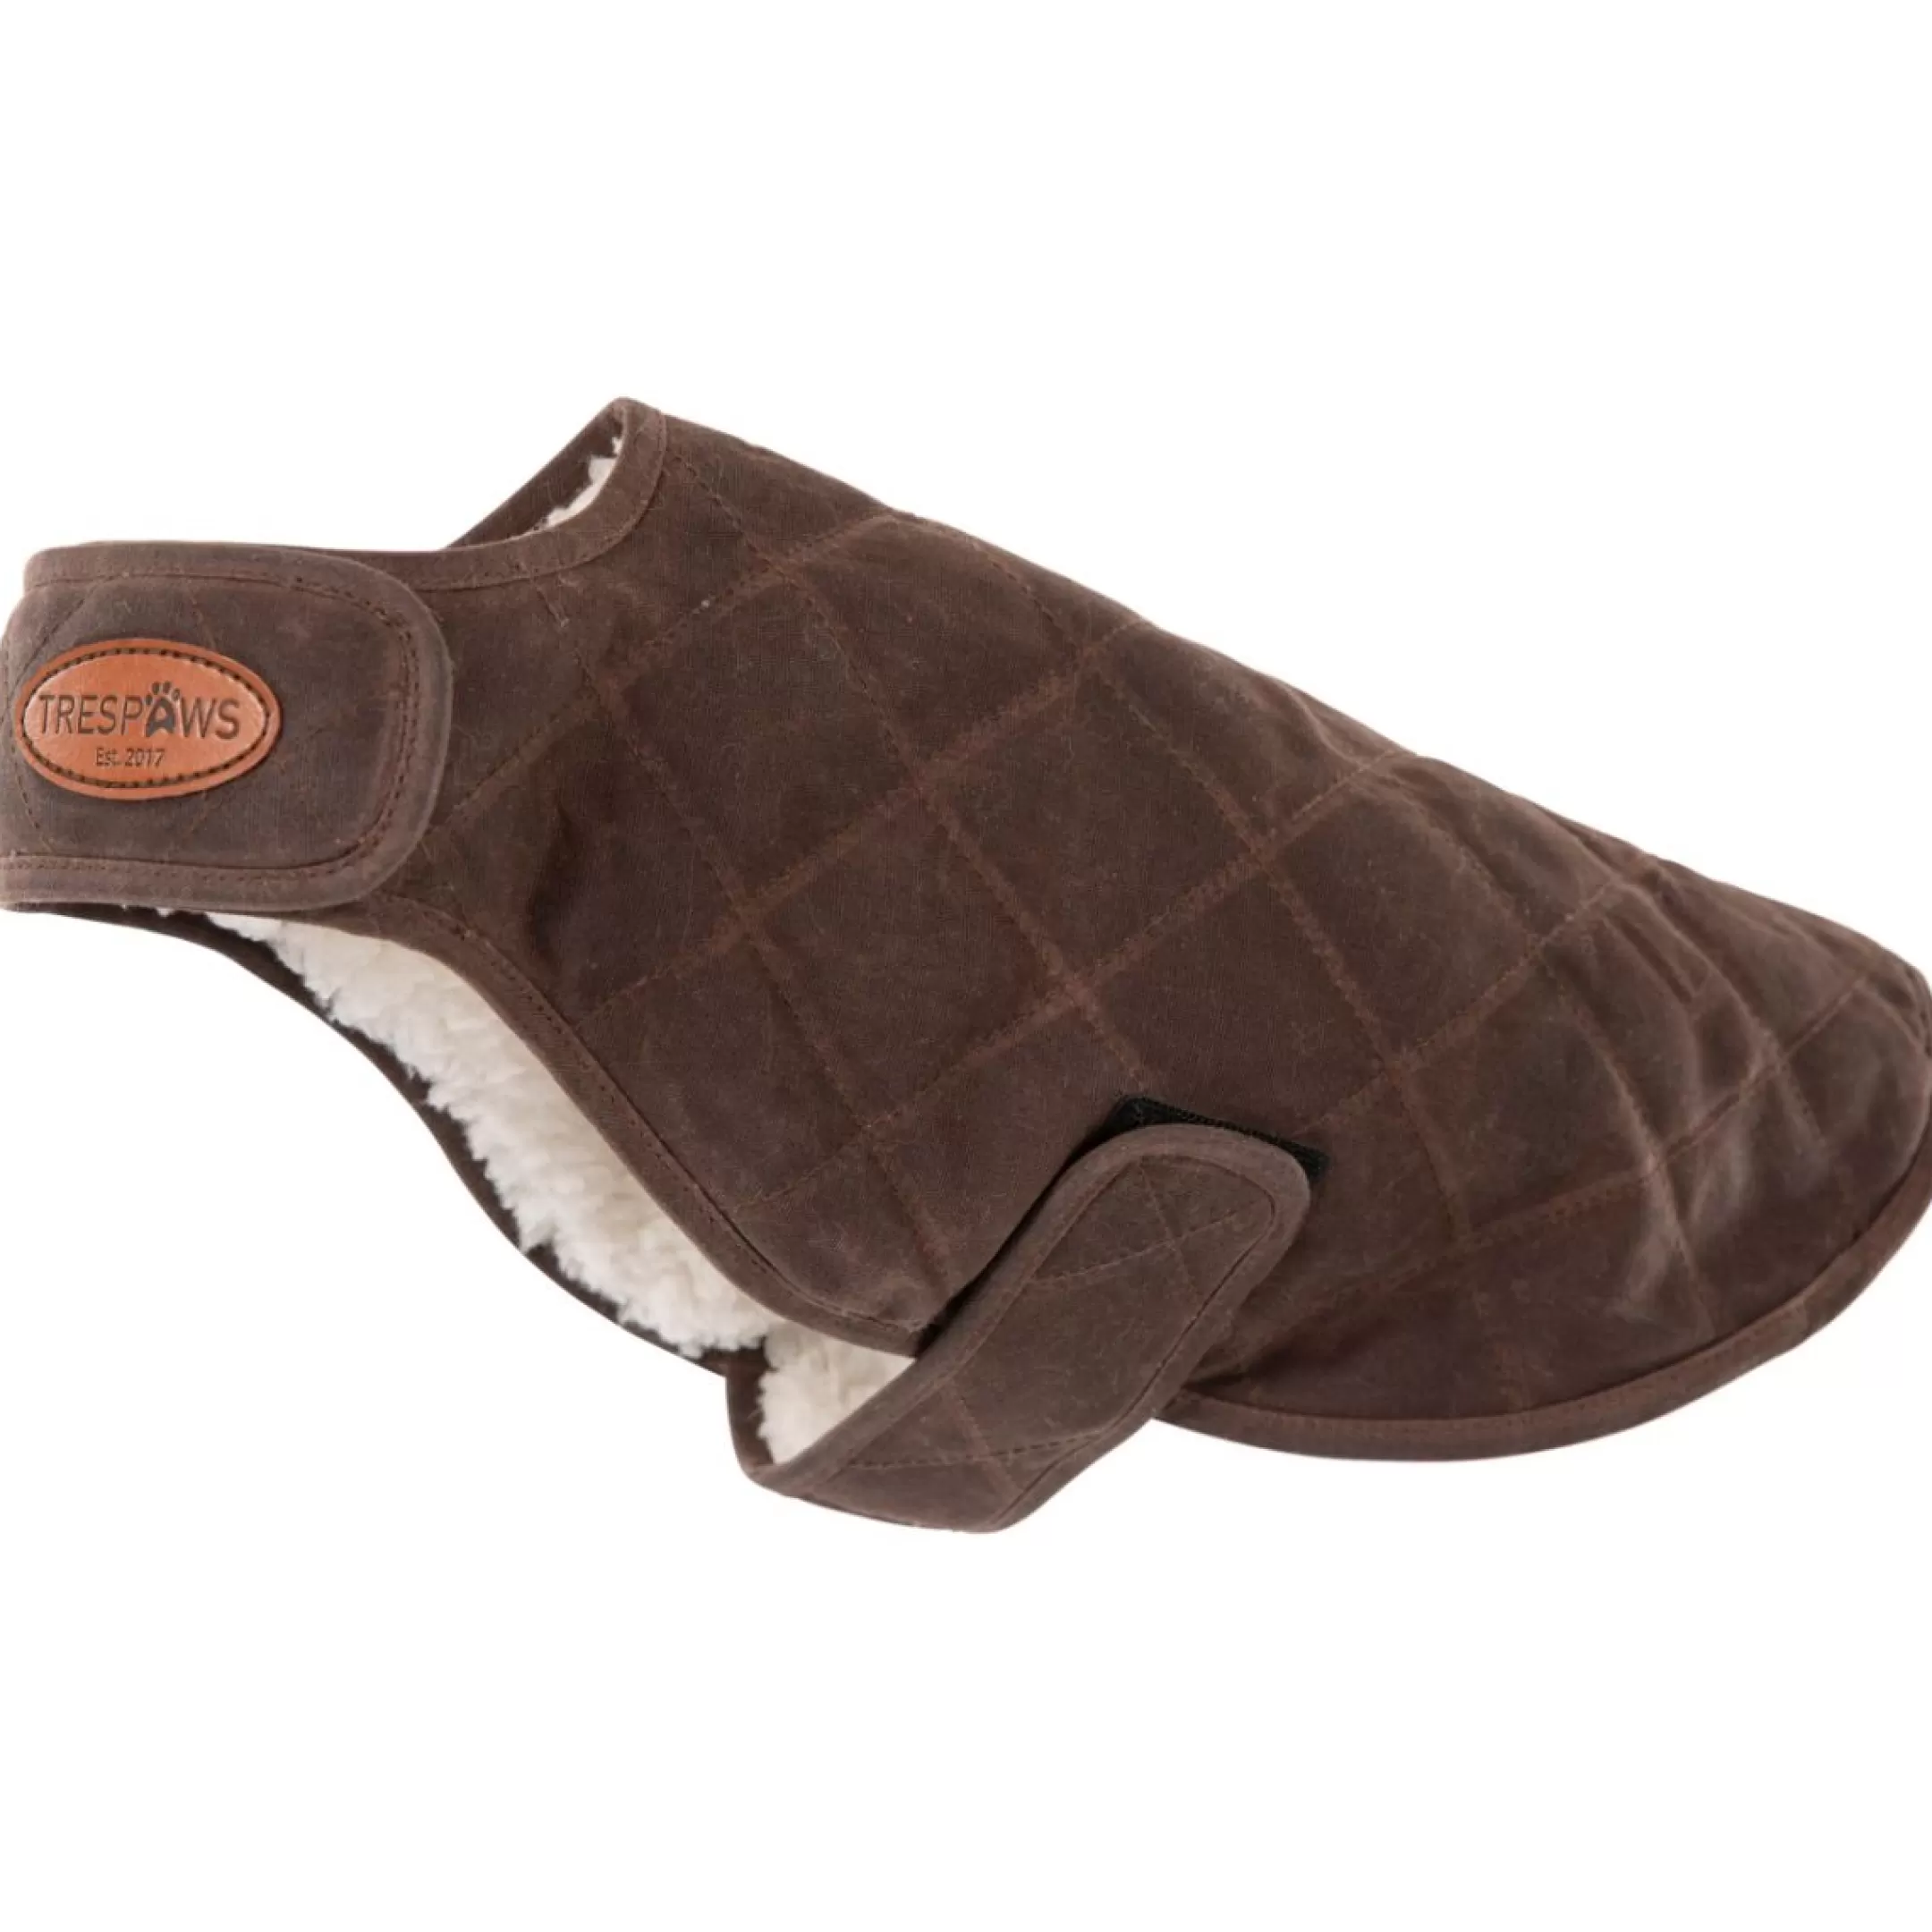 Trespaws Small Quilted Dog Jacket in Bark Artemis | Trespass Outlet